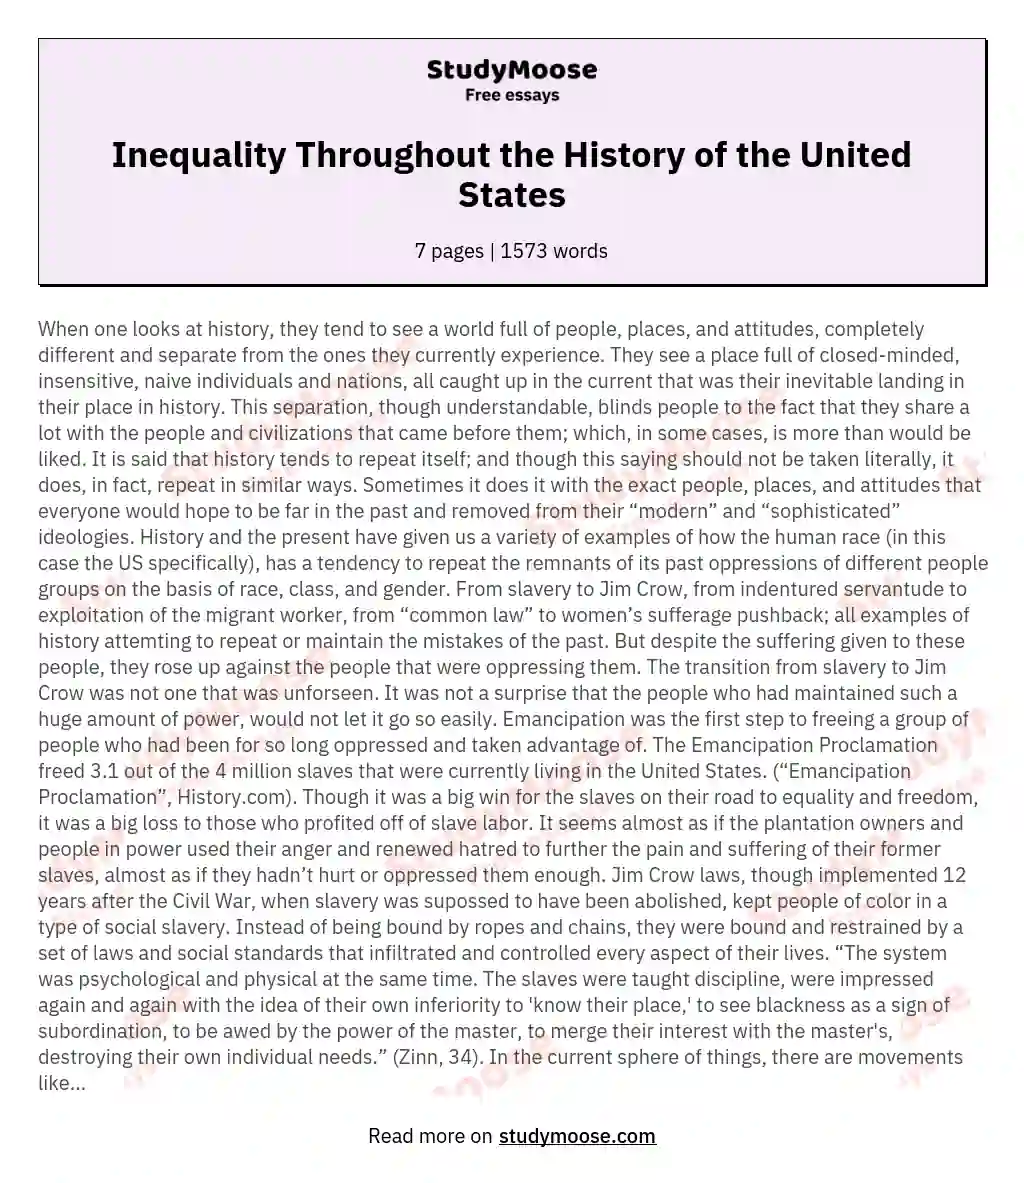 Inequality Throughout the History of the United States essay